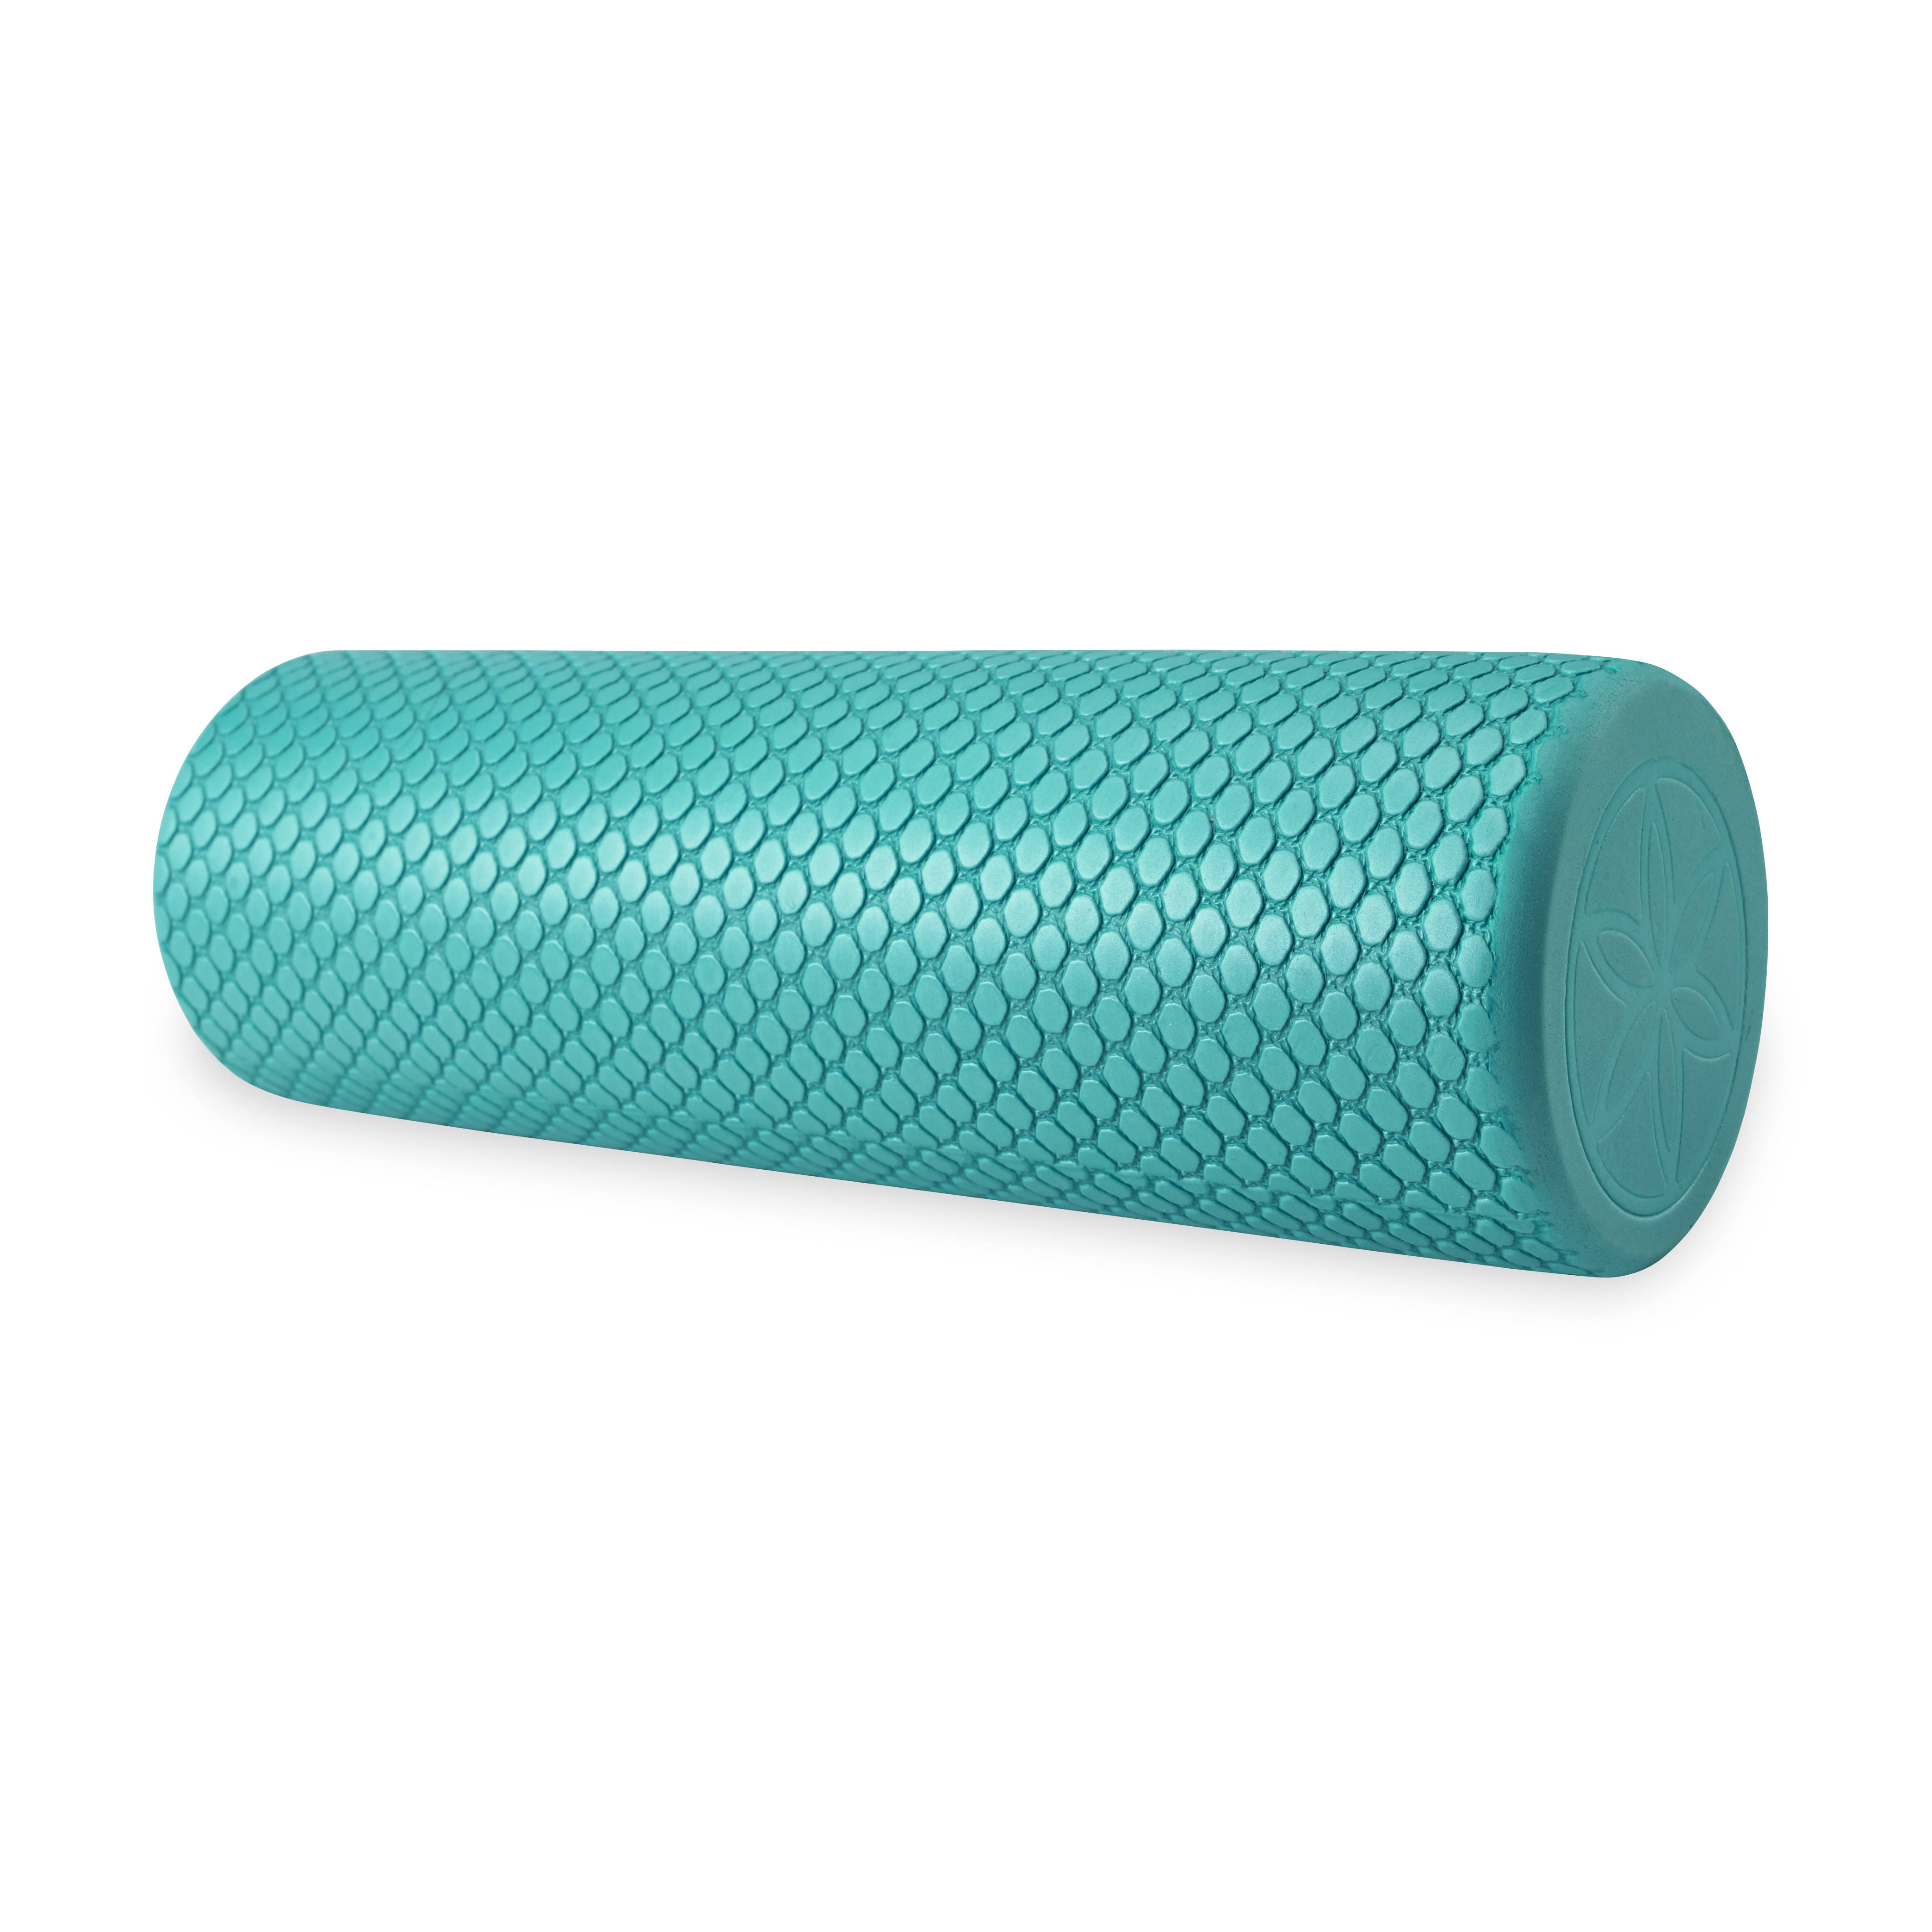 Gaiam Restore Compact Foam Roller - New Color - image 1 of 3